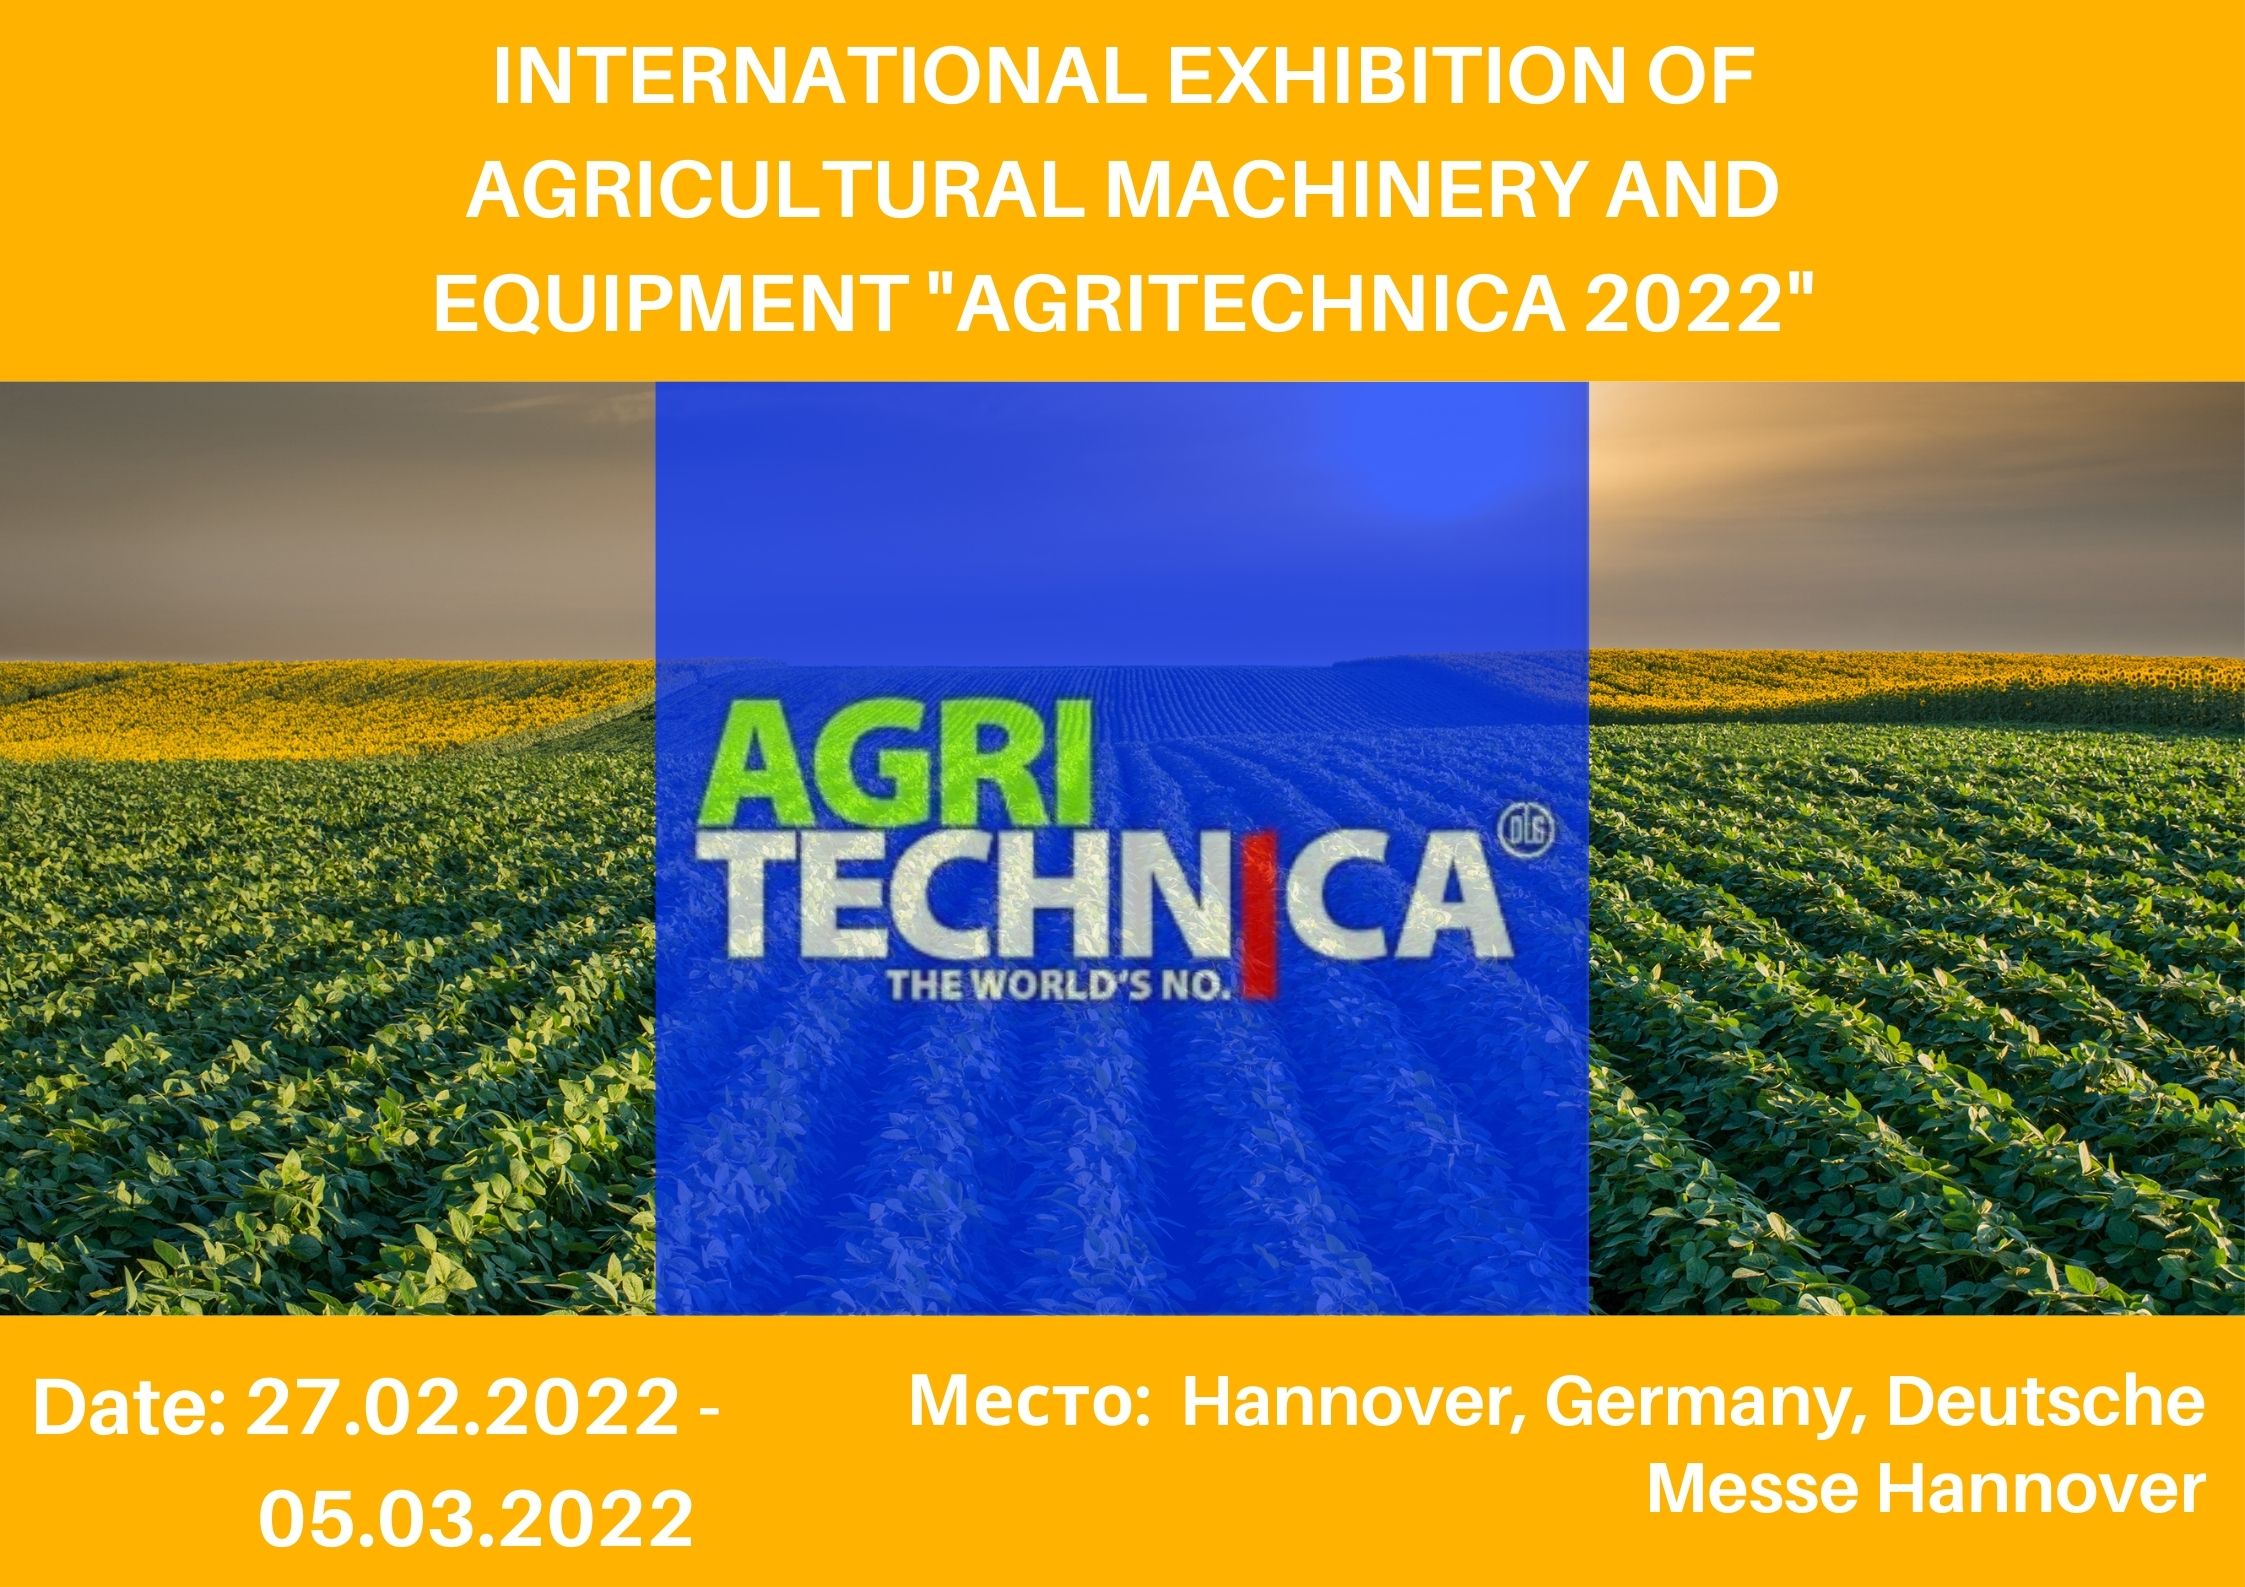 INTERNATIONAL EXHIBITION OF AGRICULTURAL MACHINERY AND EQUIPMENT 